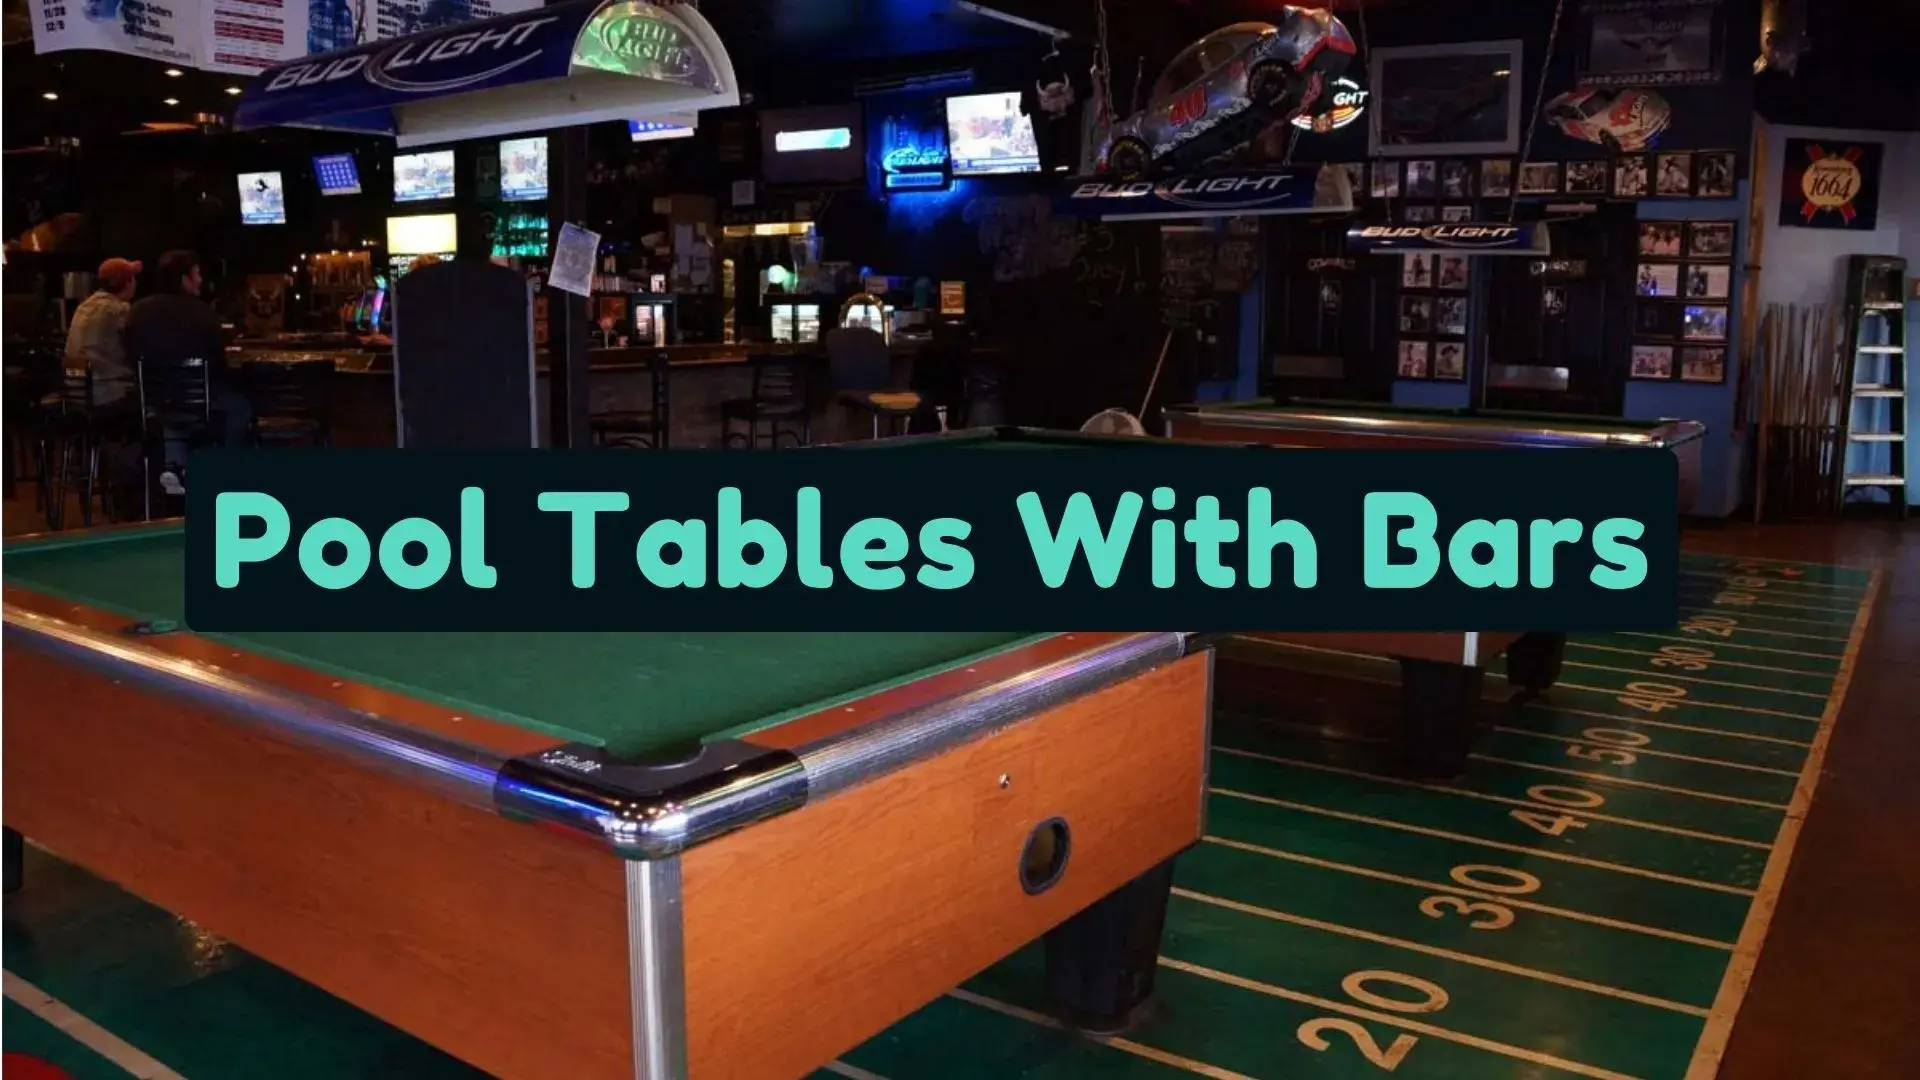 Bars With Pool Tables Near Me [ Billiards, Pools, Restaurant - Open Now ] - Open-near-me.Com